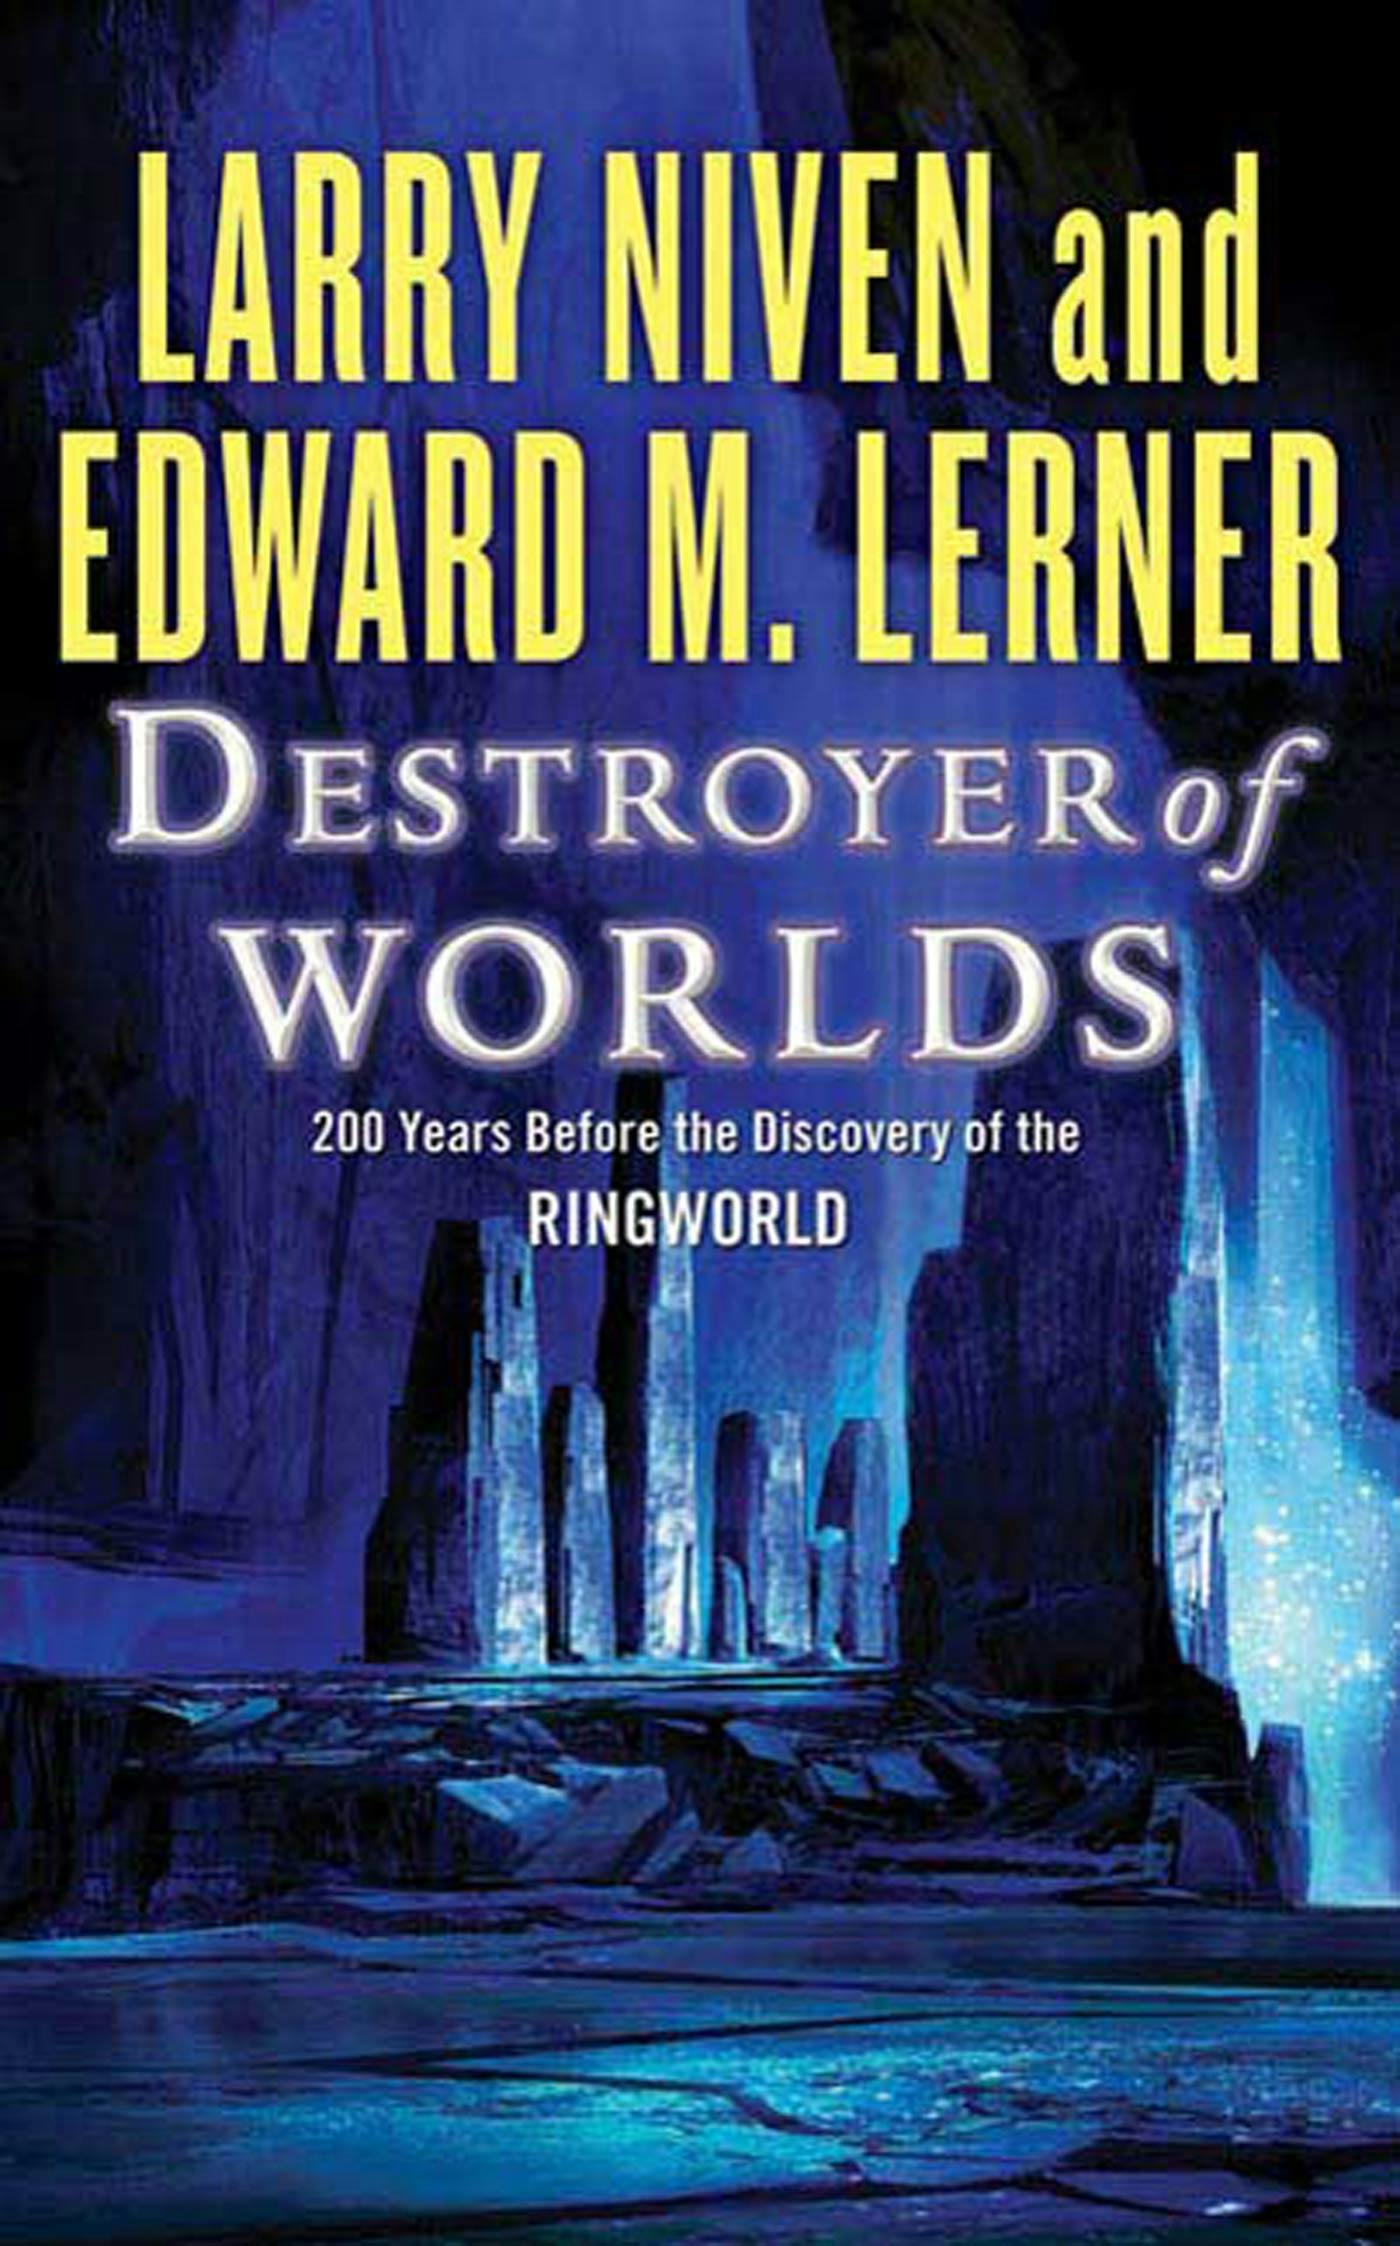 Cover for the book titled as: Destroyer of Worlds